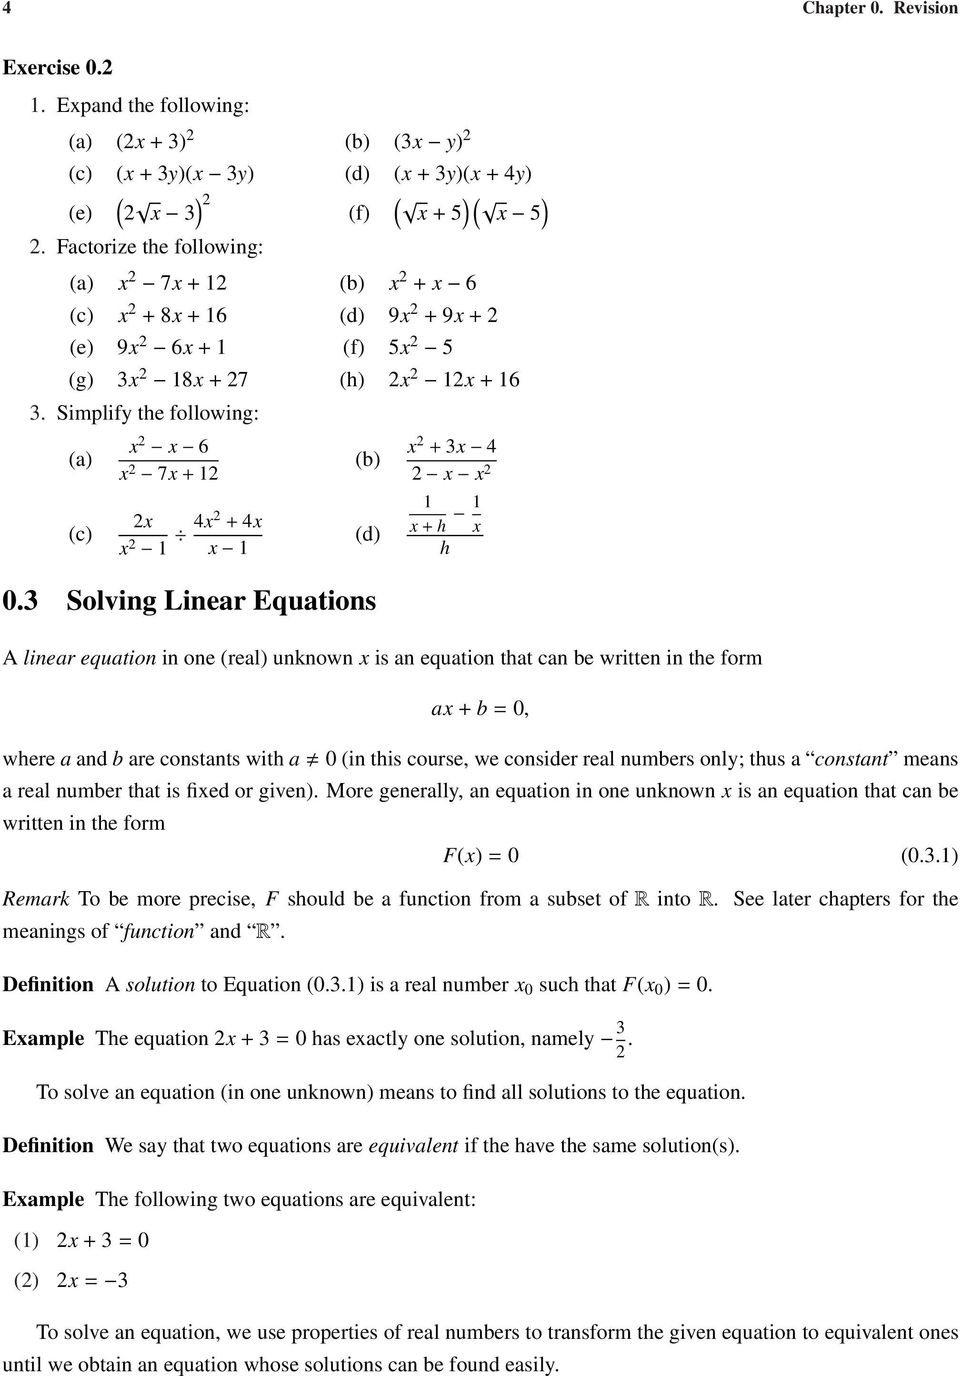 3 Solving Linear Equations x + 3x 4 x x x + h x h A linear equation in one (real) unknown x is an equation that can be written in the form ax + b 0, where a and b are constants with a 0 (in this